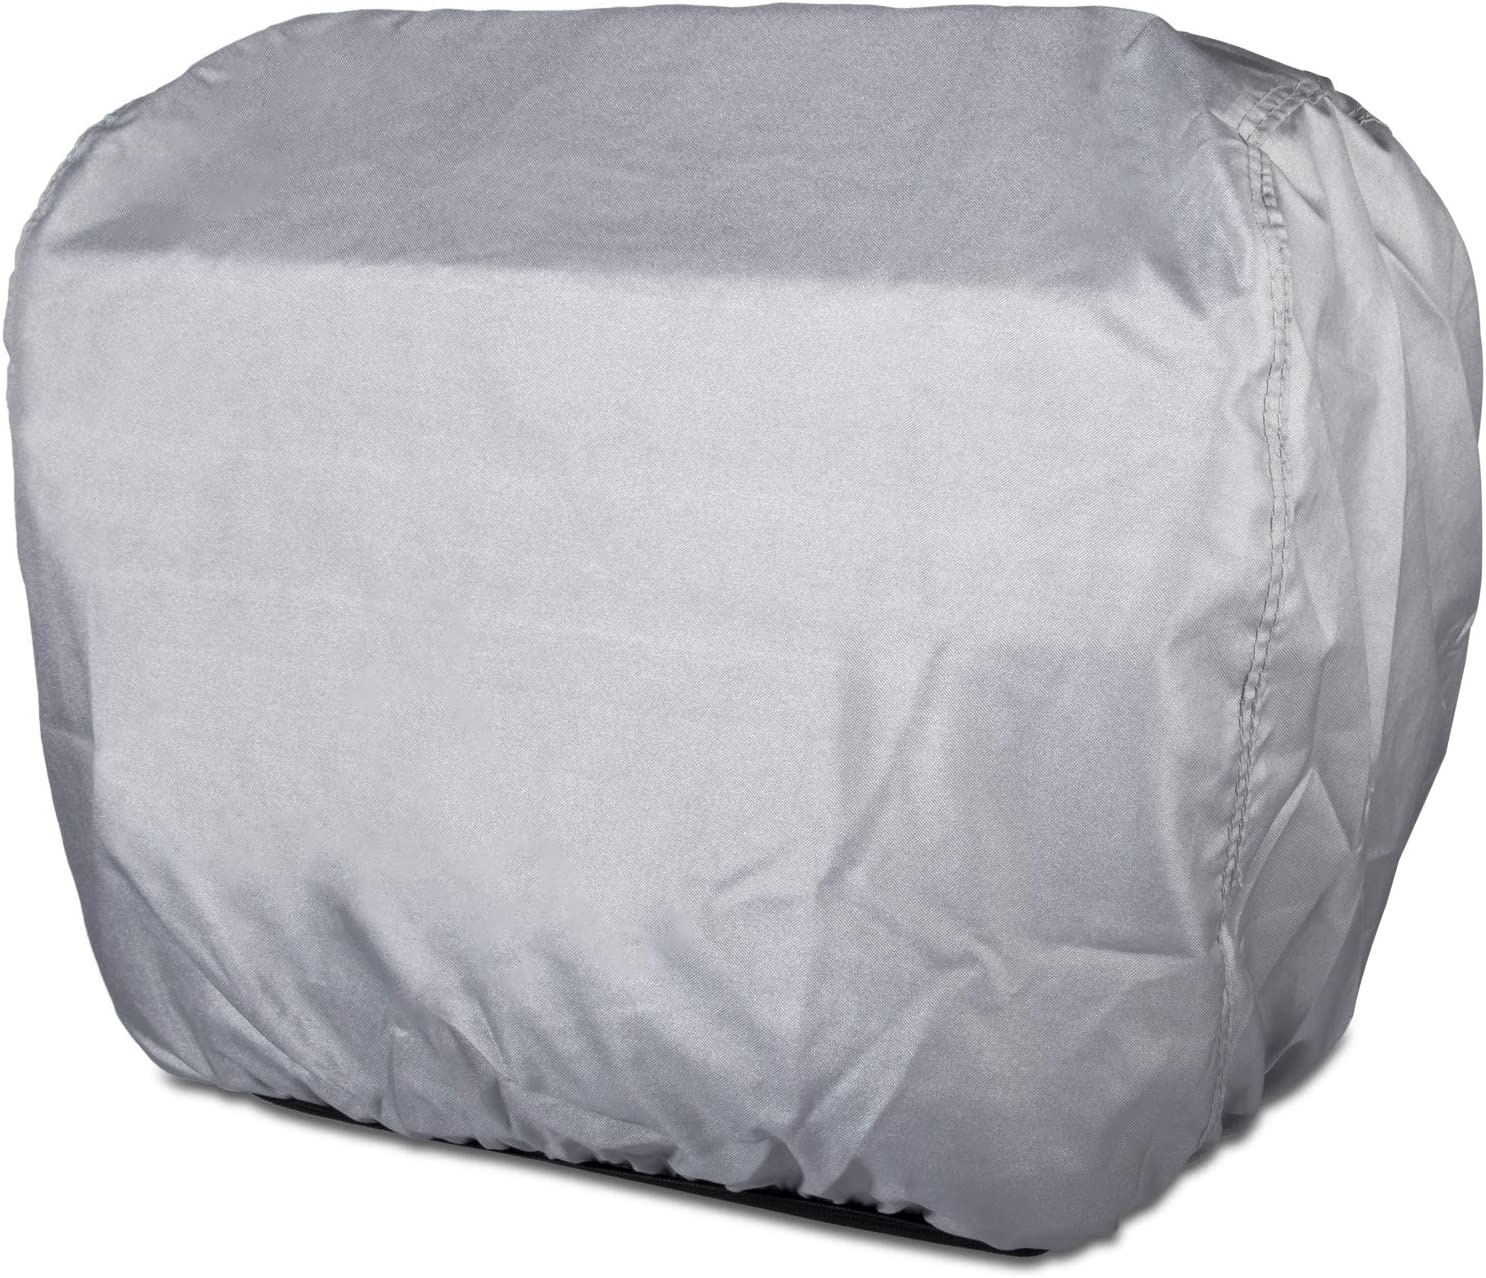 Sunluway Generator Cover Fit for Honda EU3000is Generator & Predator 3500 – All Season Outdoor Storage Cover Discreetly Protect Your Generator (Equivalent to Part Number 08P57-ZS9-00S)